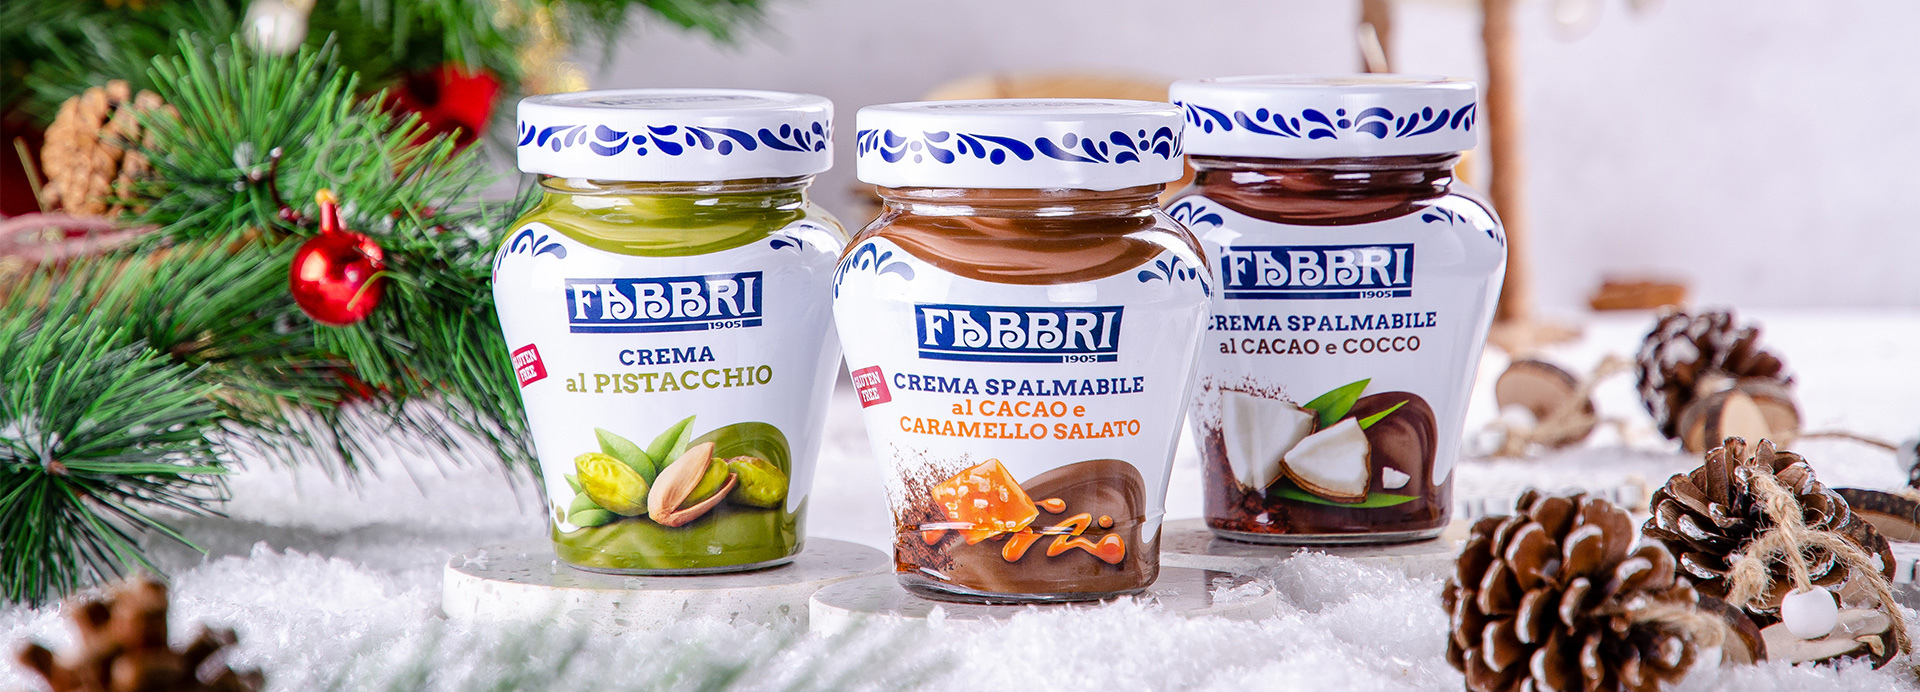 Discover all the new Fabbri Creamy Spreads and make your Christmas preparations even more delicious!